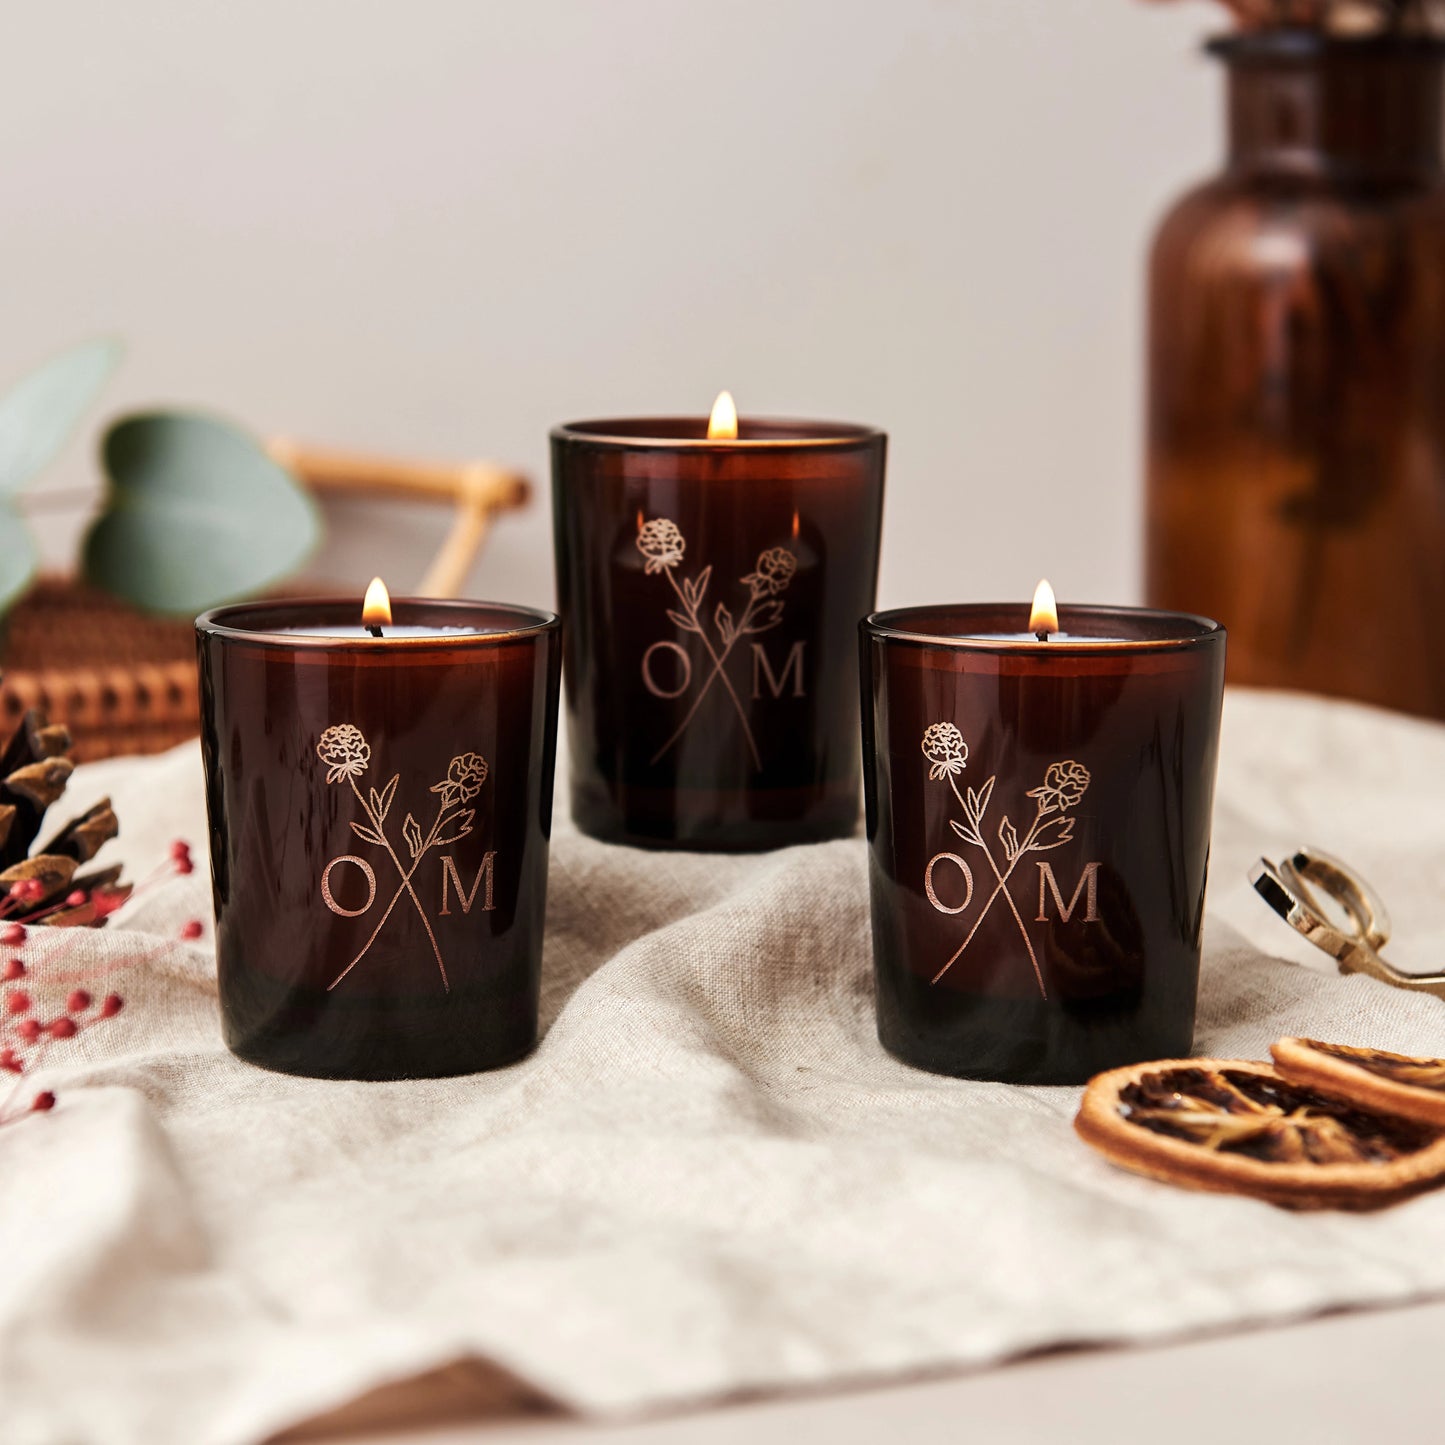 A trio of candles from our Winter Collection candle giftset. The candlelight brightens up the etched logo in the glass.